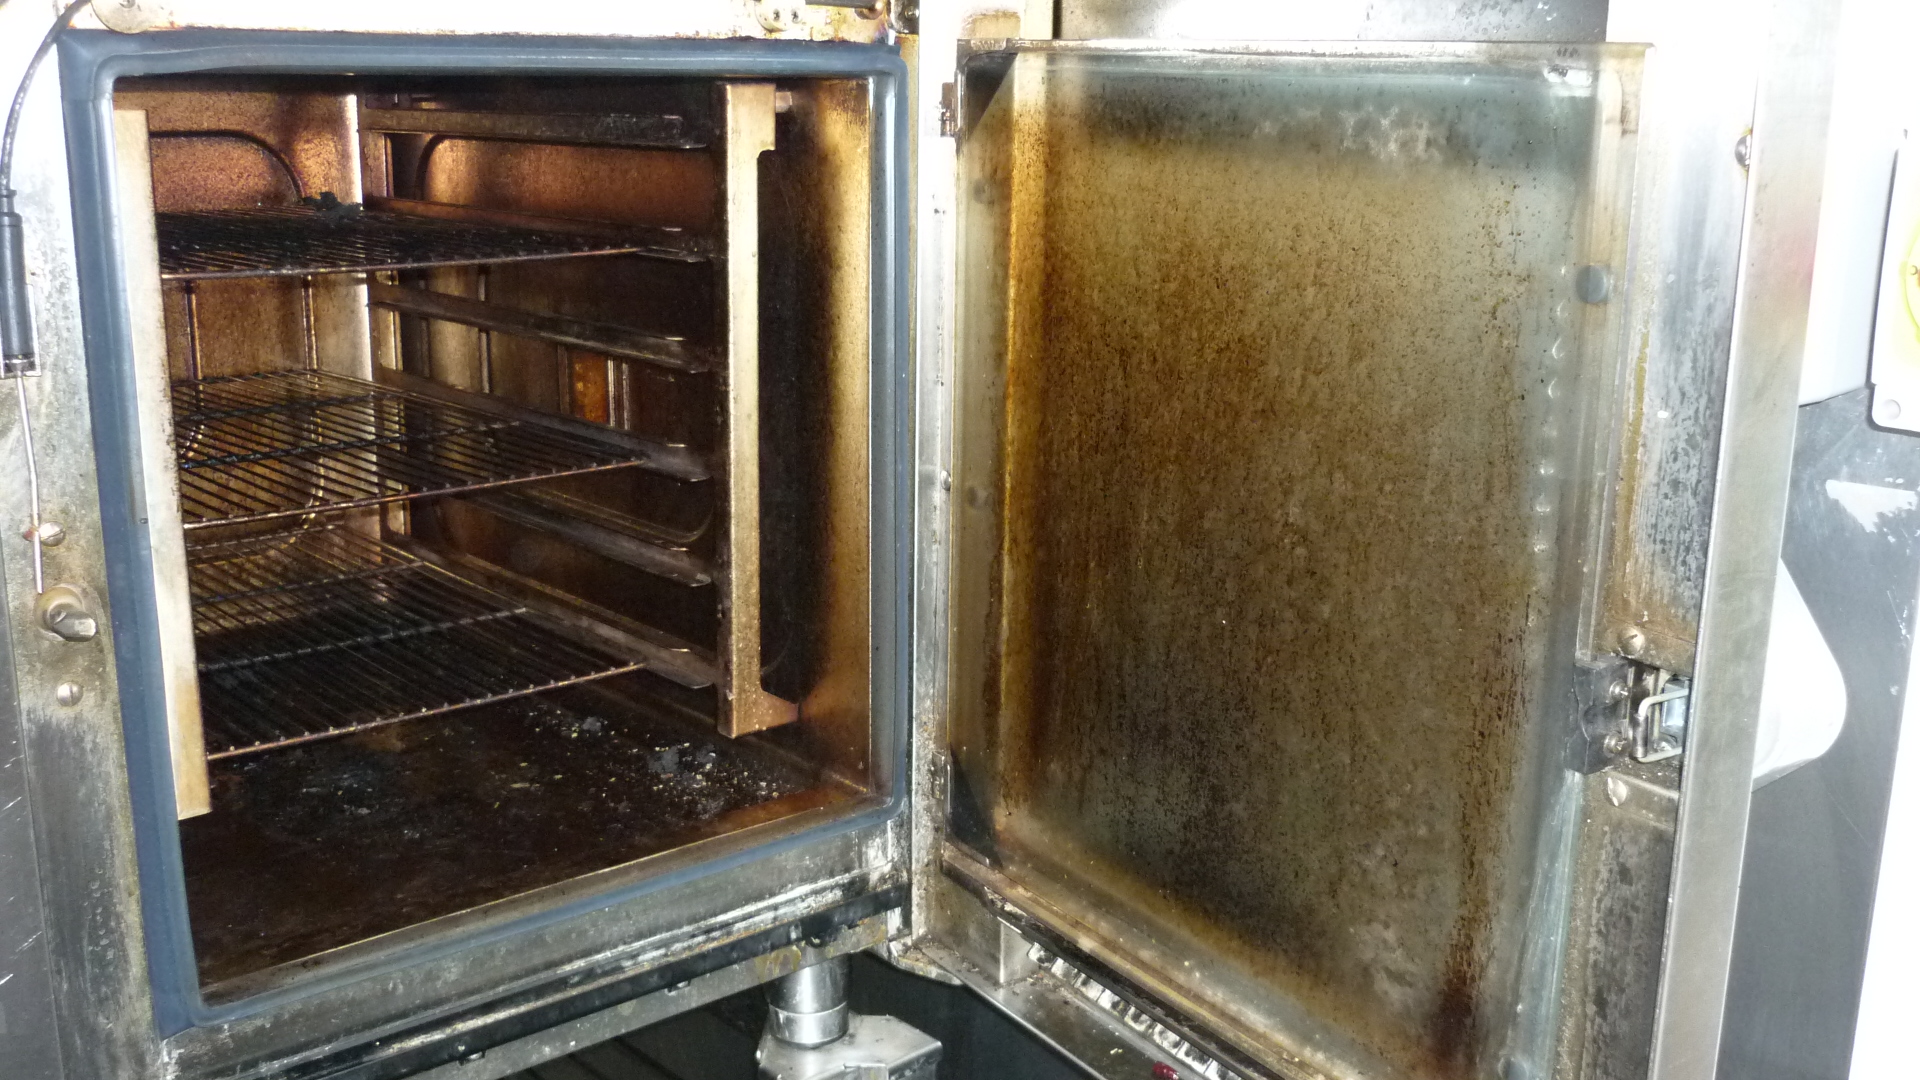 How To Deep Clean A Commercial Restaurant Oven